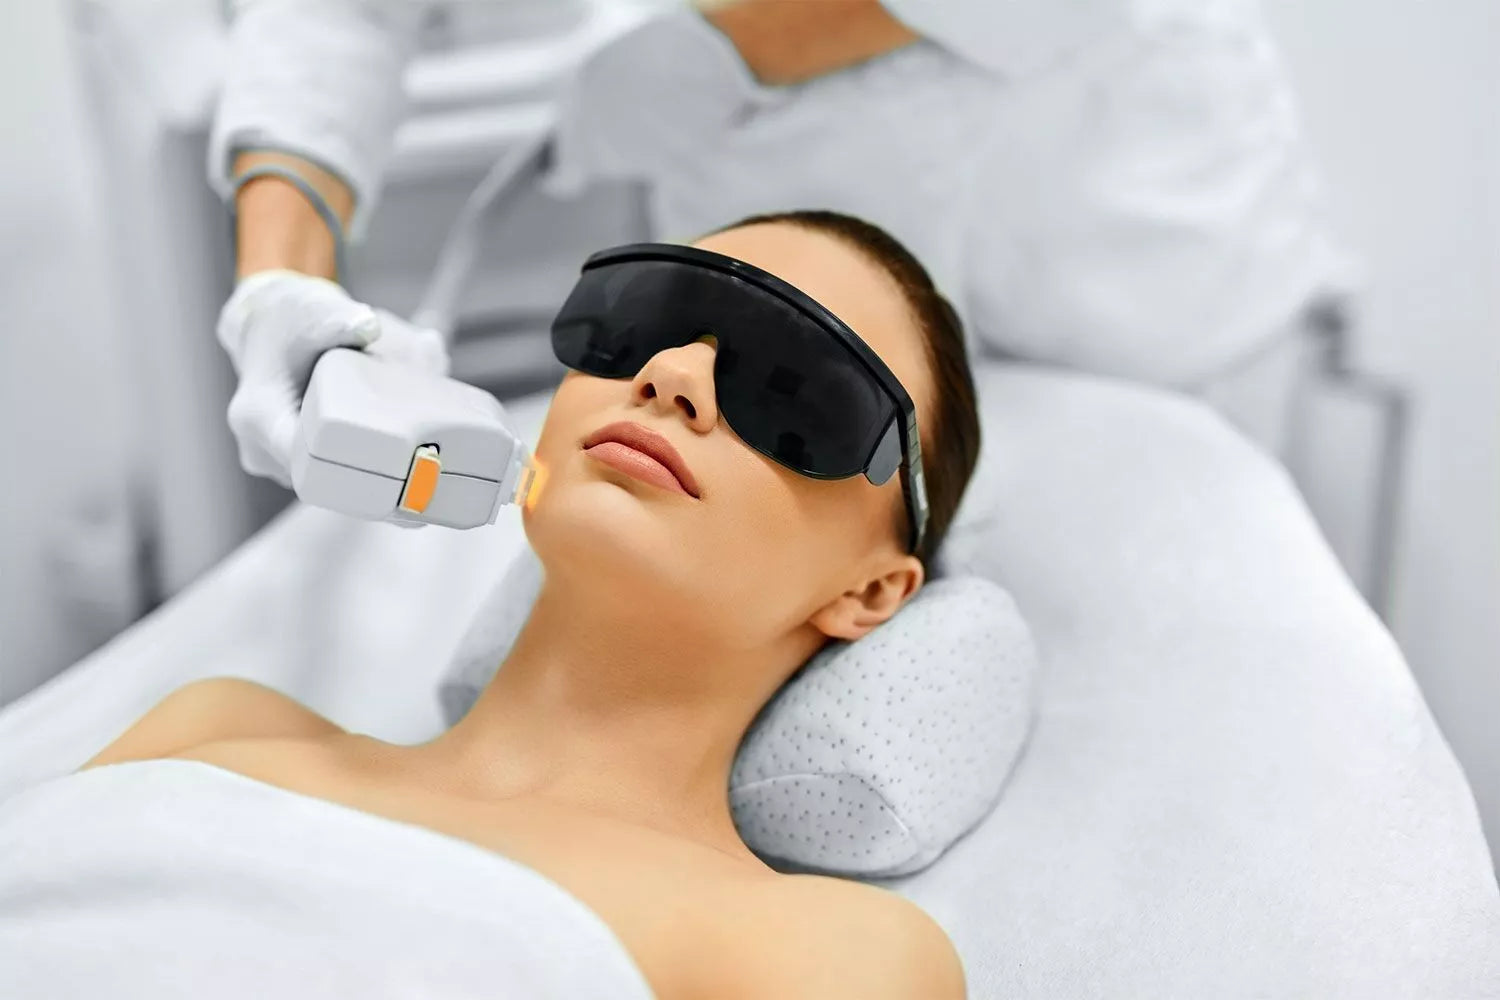 Woman Receiving a Laser Treatment to Improve Her Skin